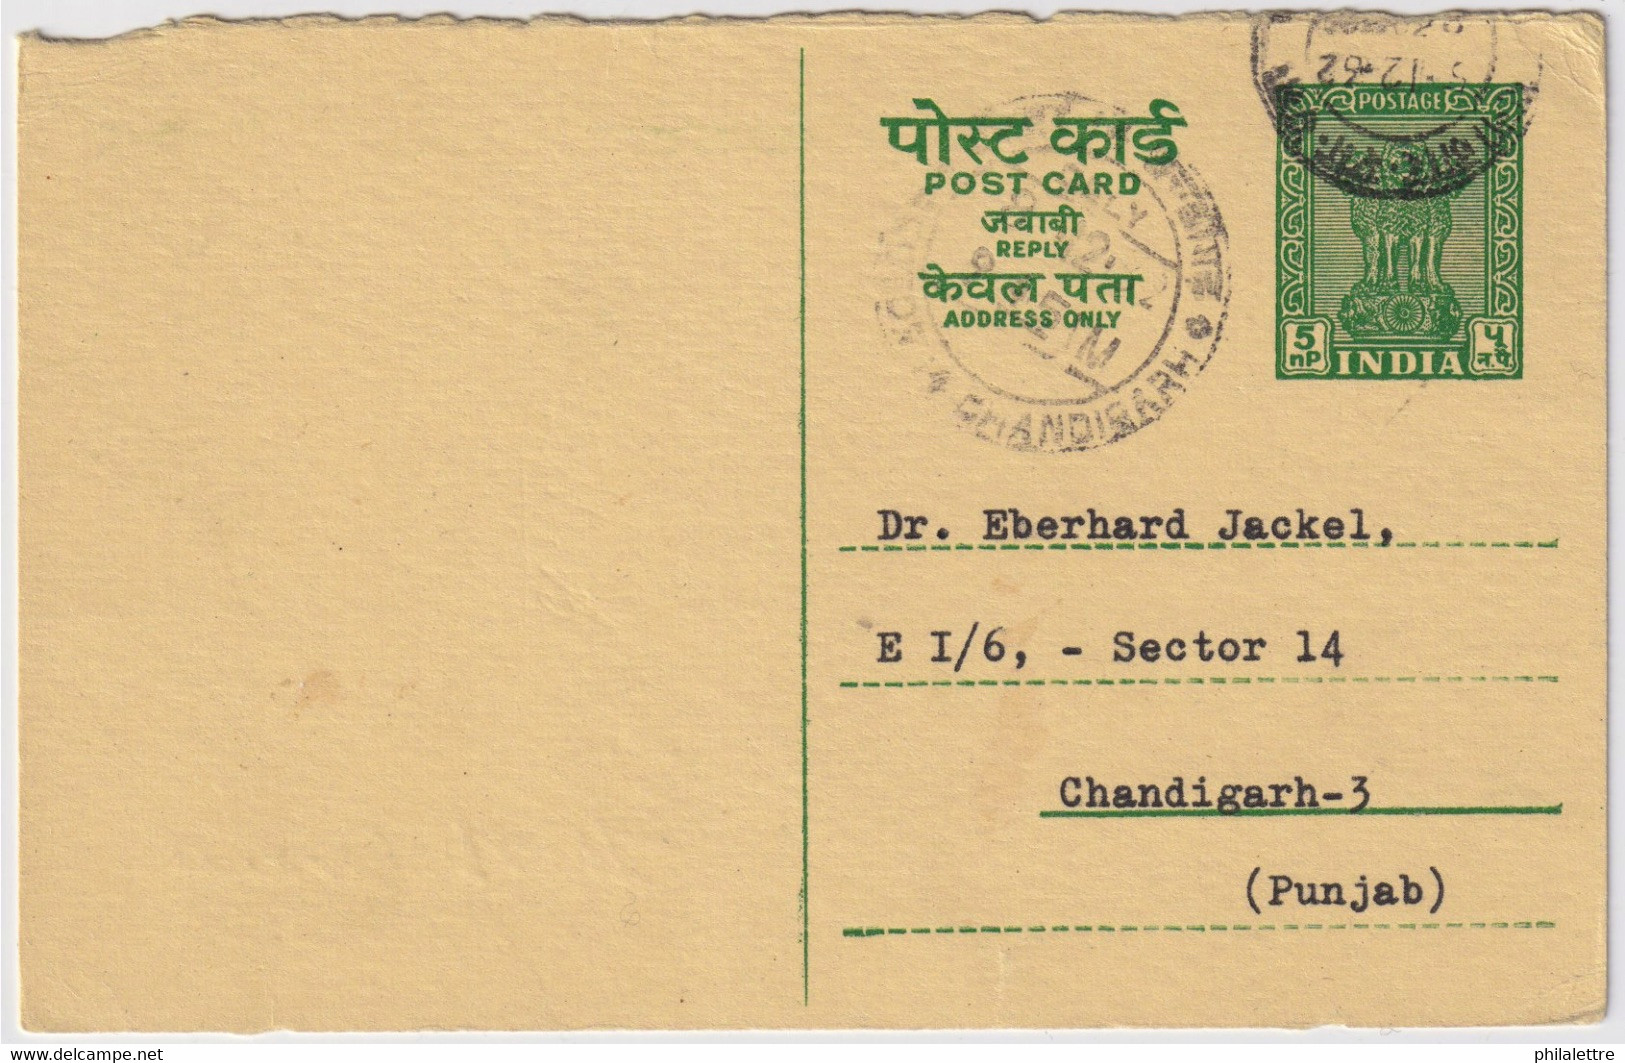 INDE / INDIA - 1962 - Fine Postal Card Used Locally In CHANDIGARH - Postales